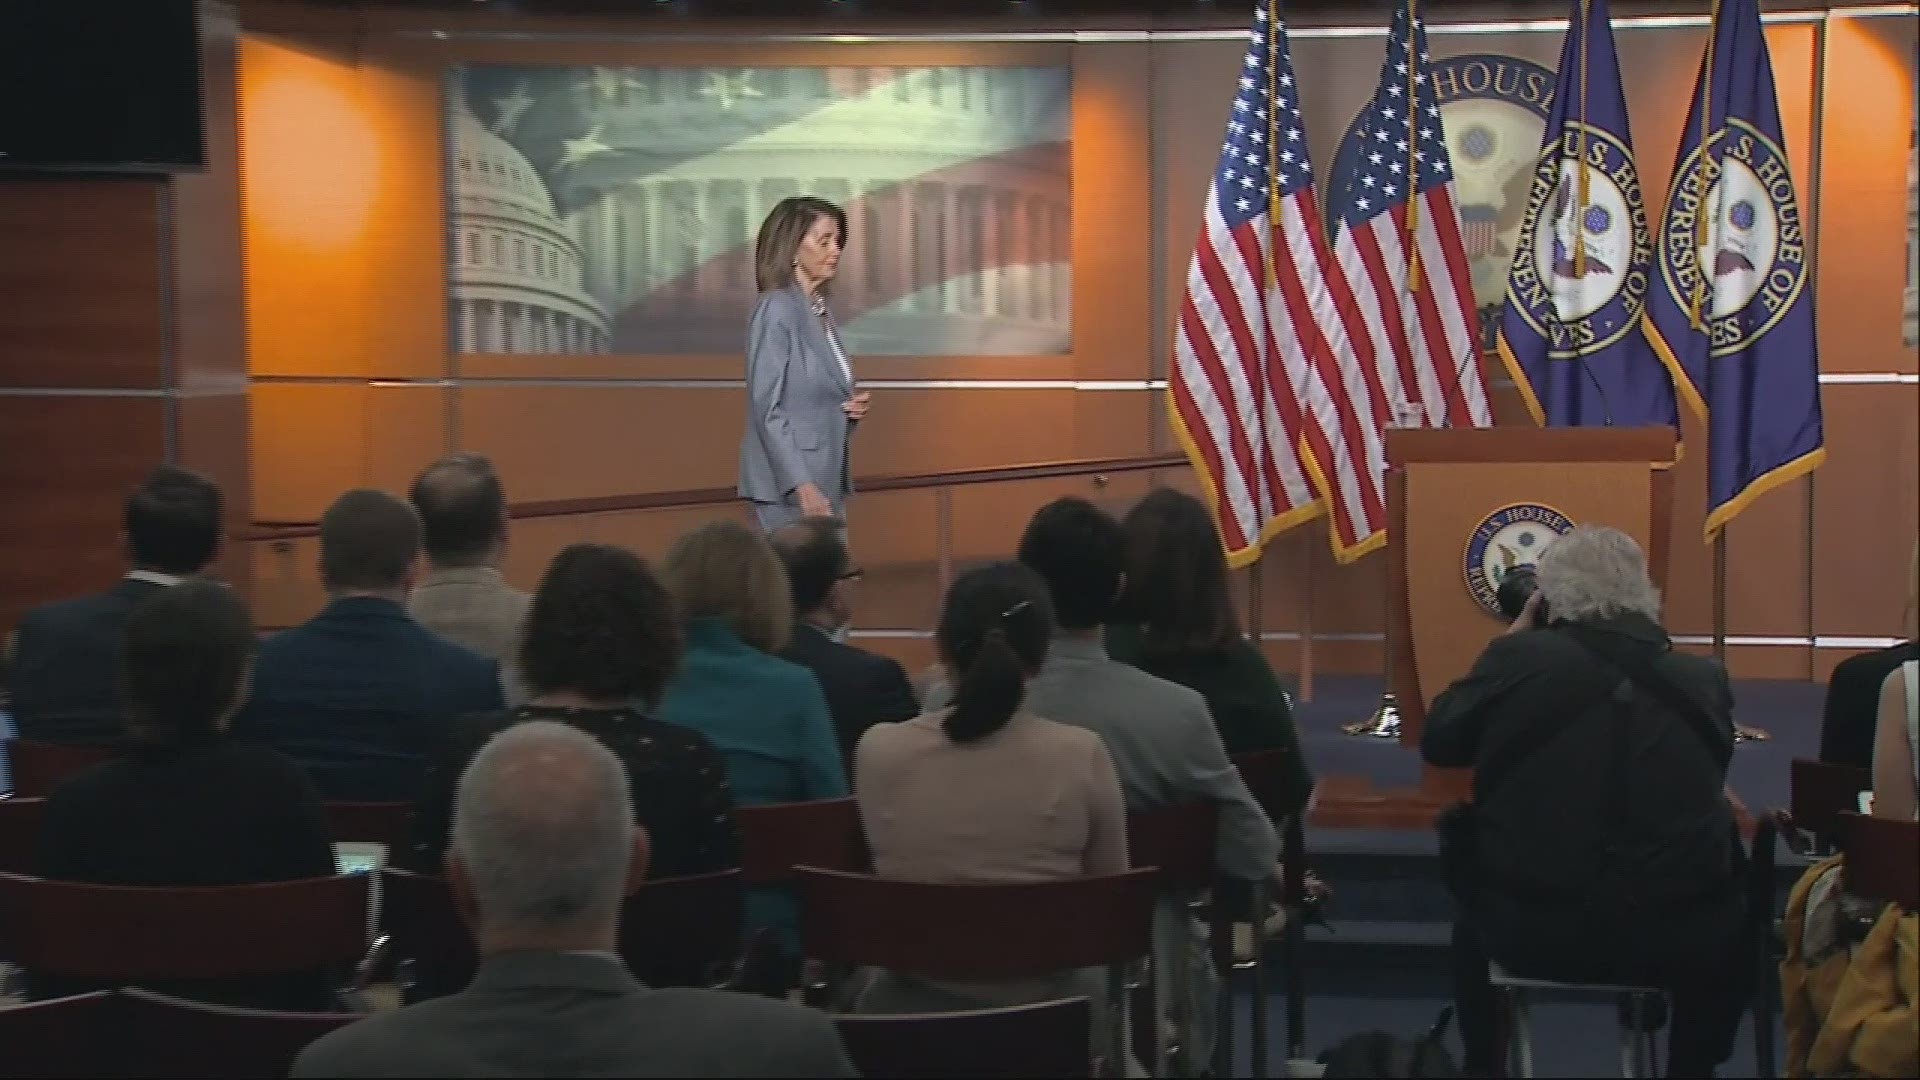 House Speaker Nancy Pelosi told reporters that she agrees with House Judiciary Committee Chairman Jerry Nadler that the U.S. is in a 'constitutional crisis' because the Trump administration refuses to comply with subpoenas issued by House committees.